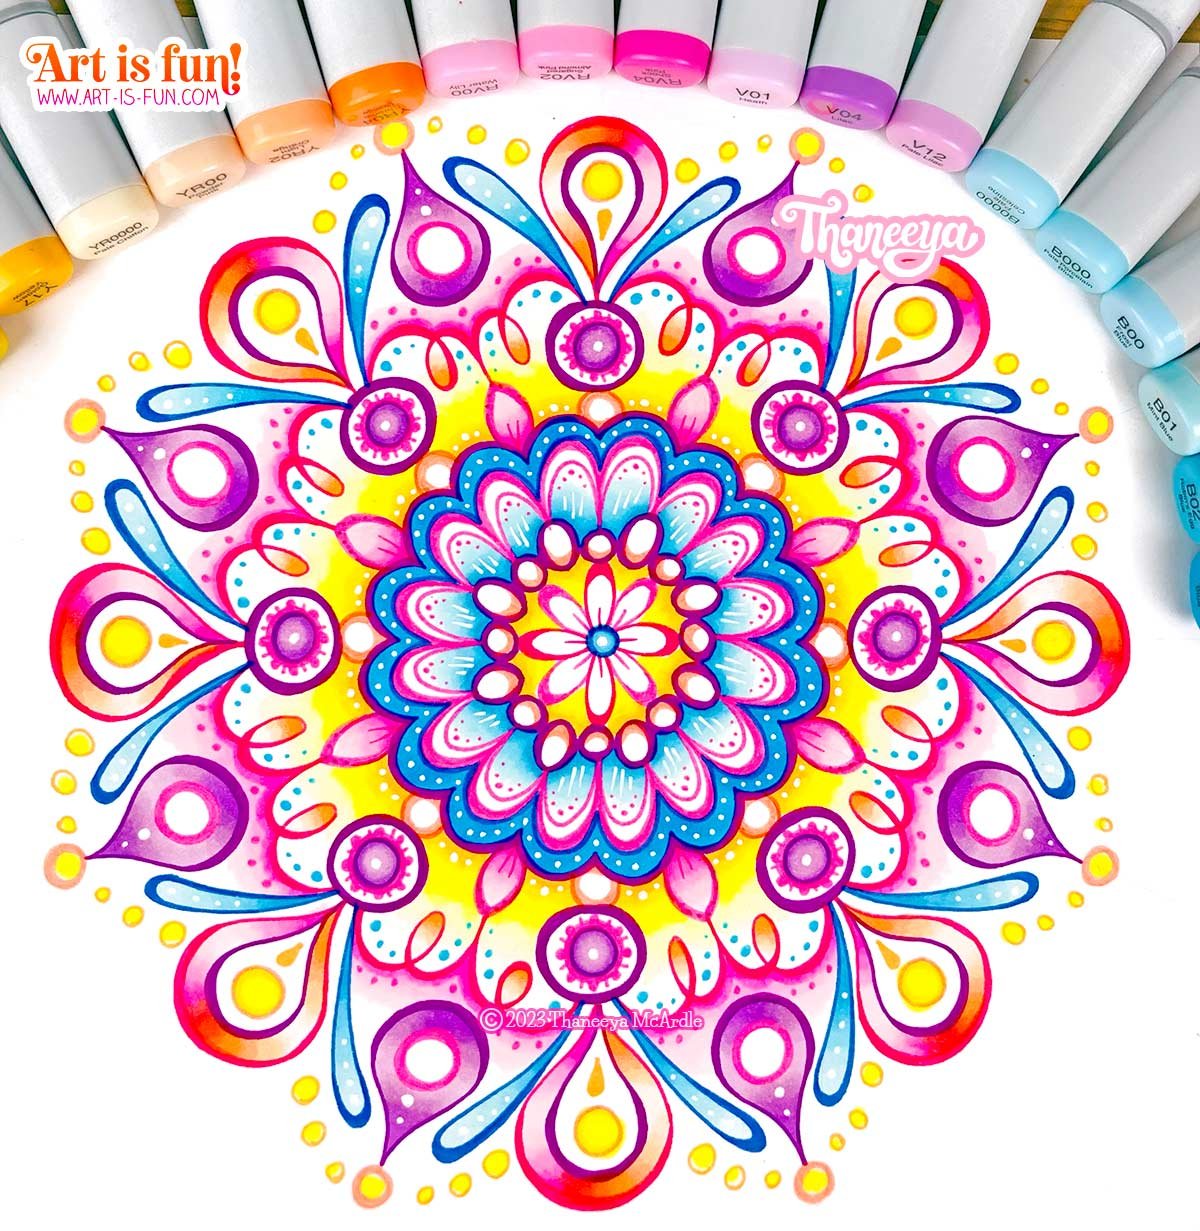 learn how to draw a mandala video tutorial by Thaneeya McArdle 1